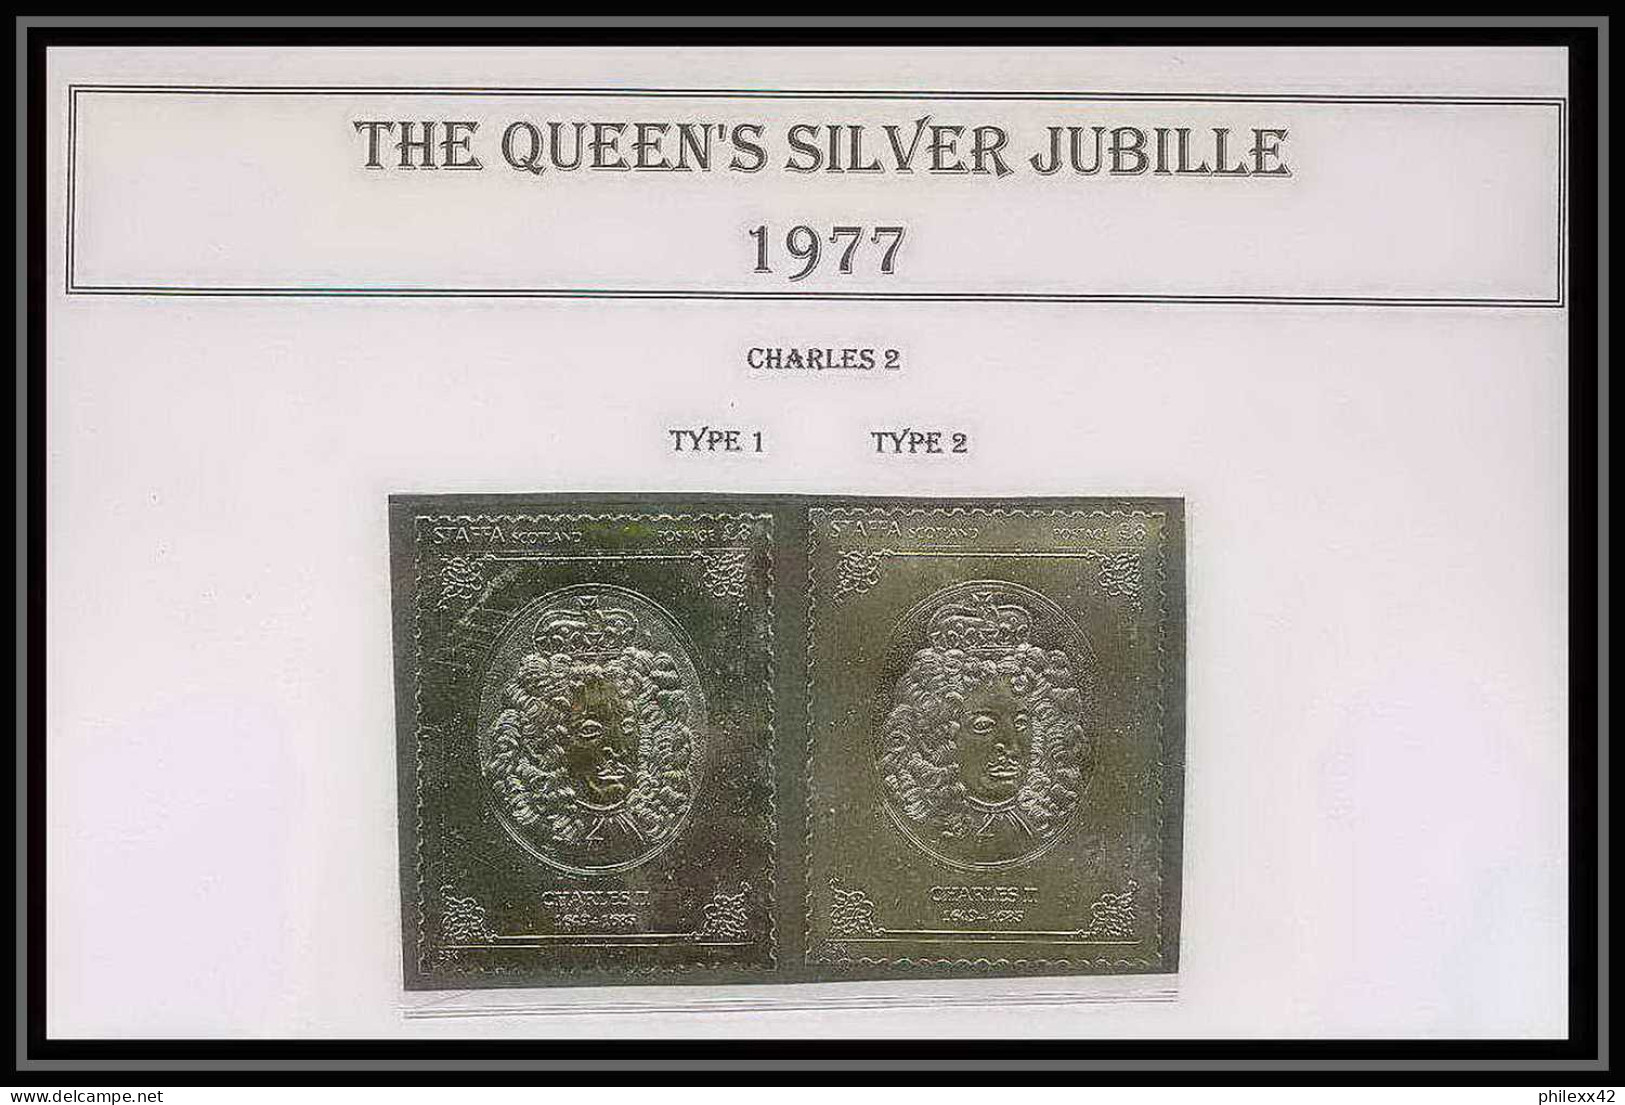 446a Staffa Scotland The Queen's Silver Jubilee 1977 OR Gold Stamps Monarchy United Kingdom Charles 2 Type 1&2 ** - Emissions Locales